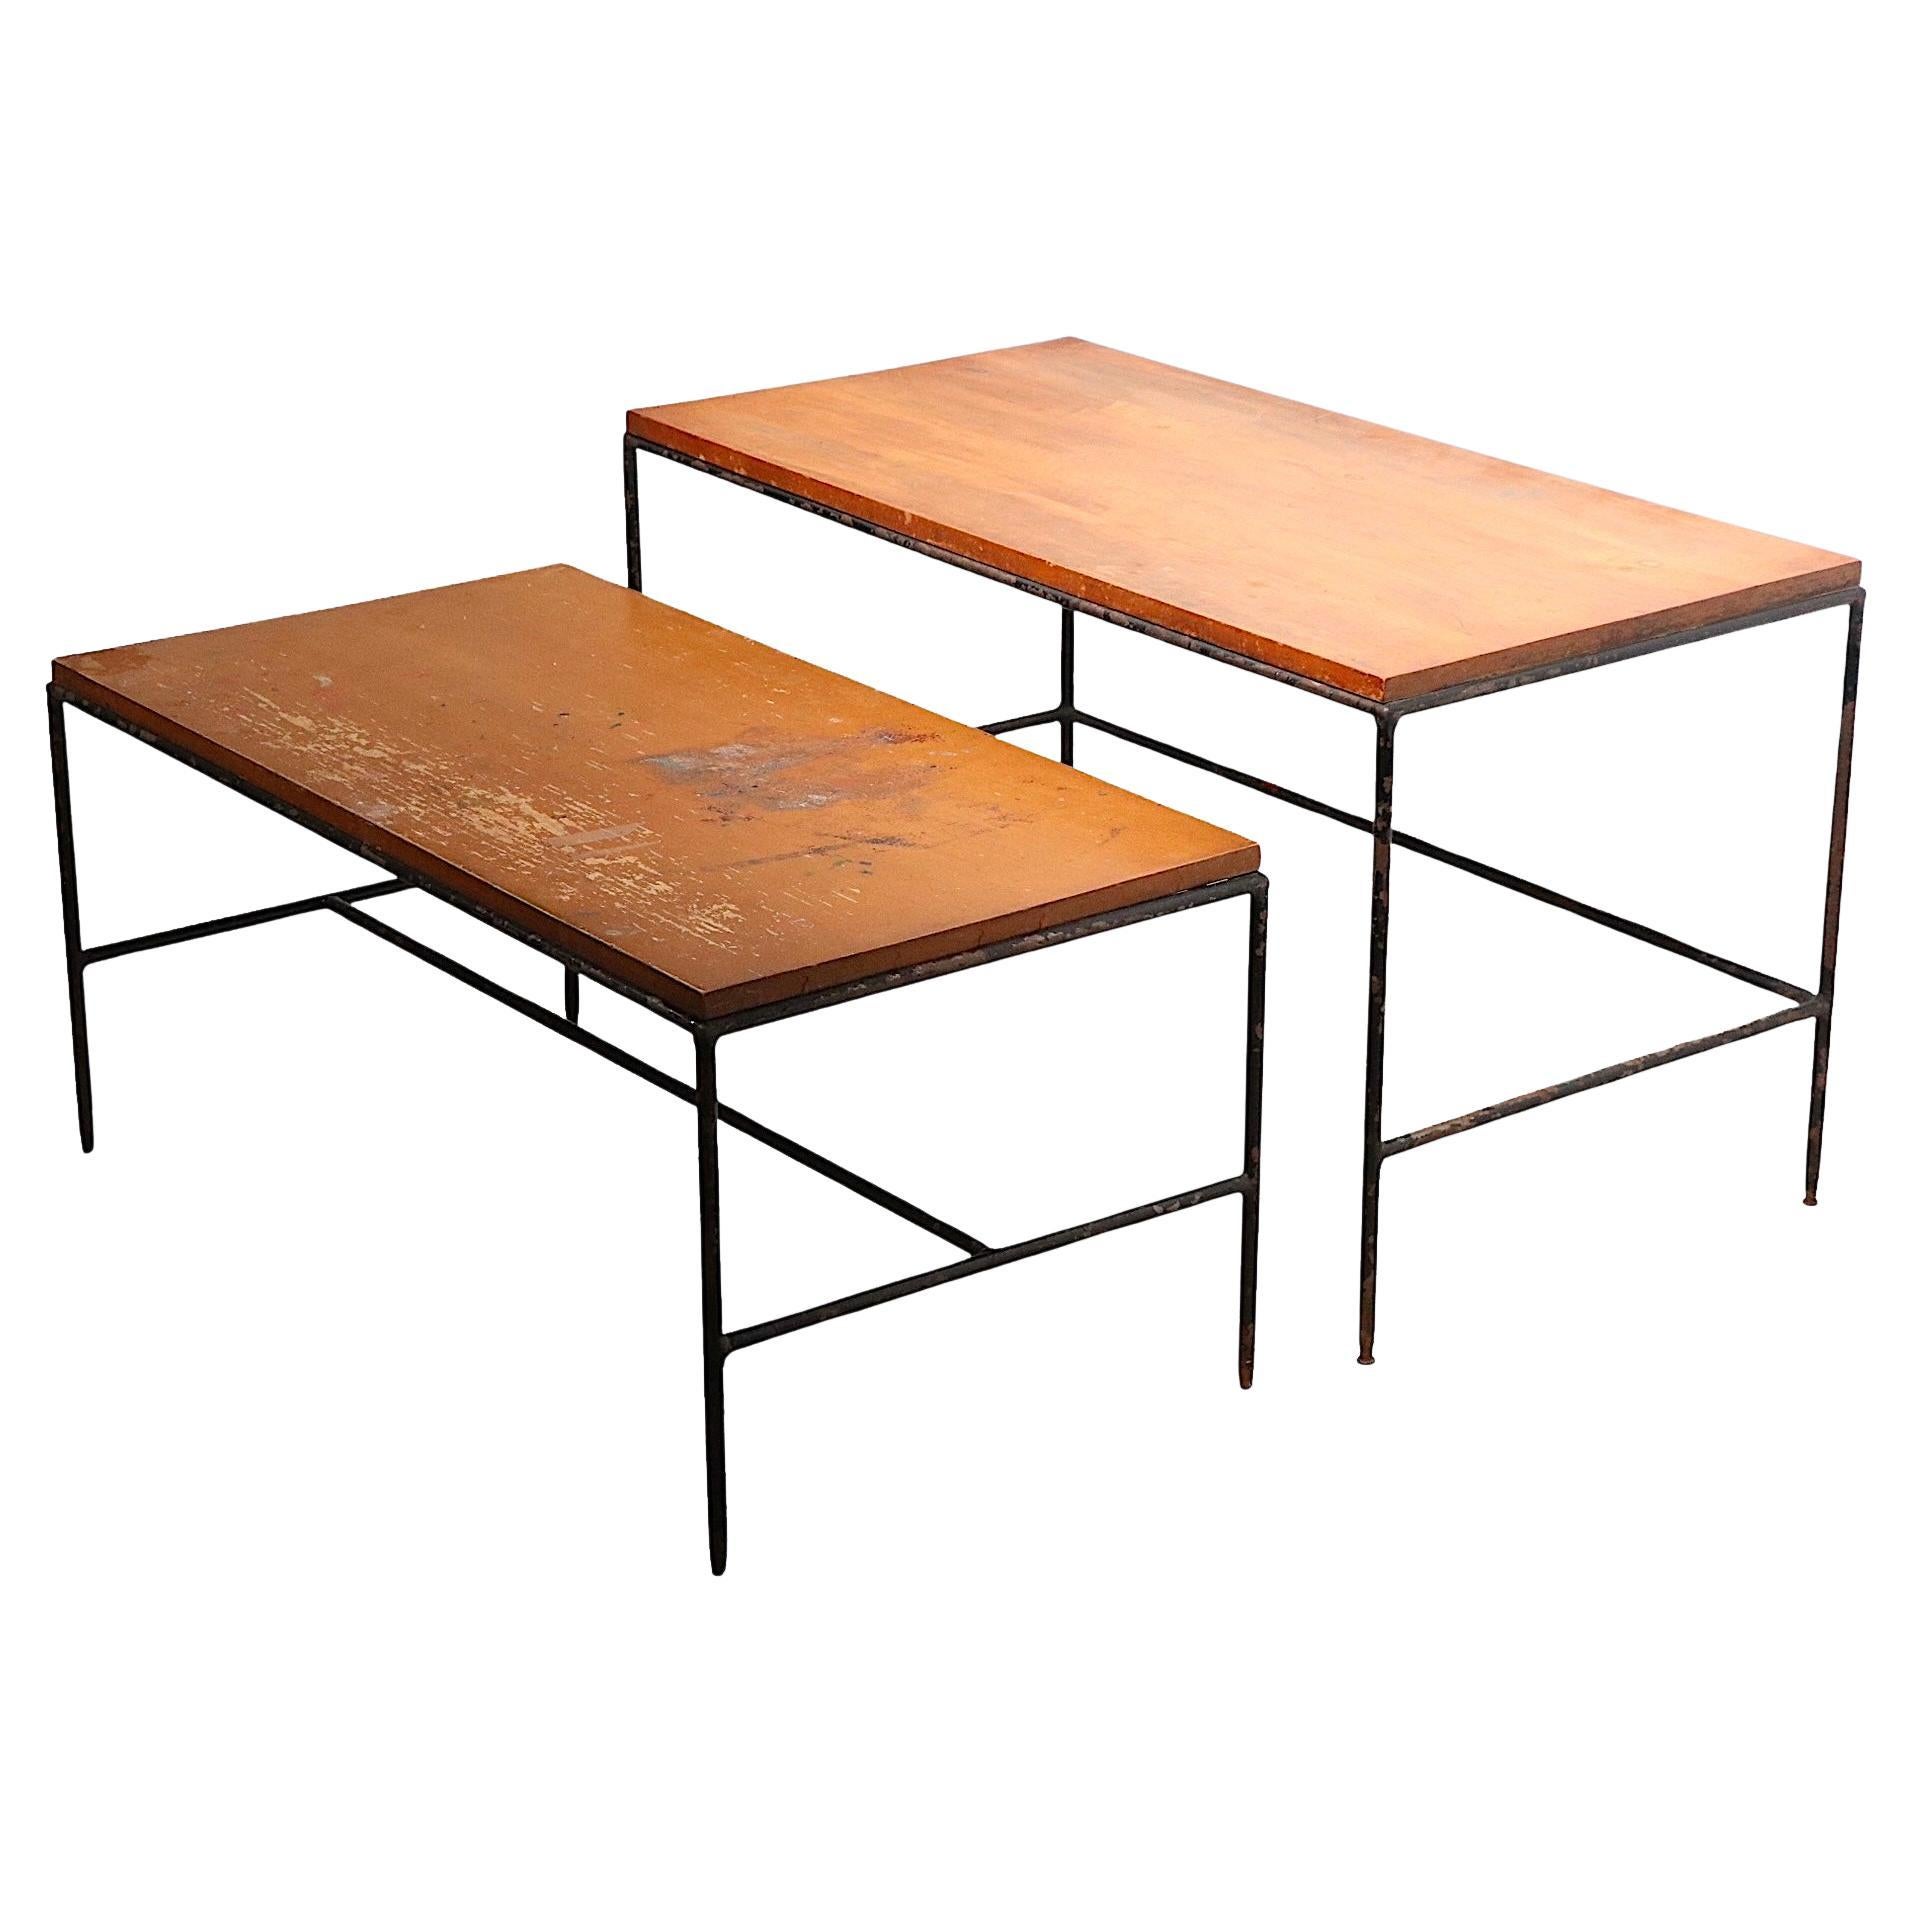 McCobb for Winchendon Planner Group Nesting Tables c 1950's For Sale